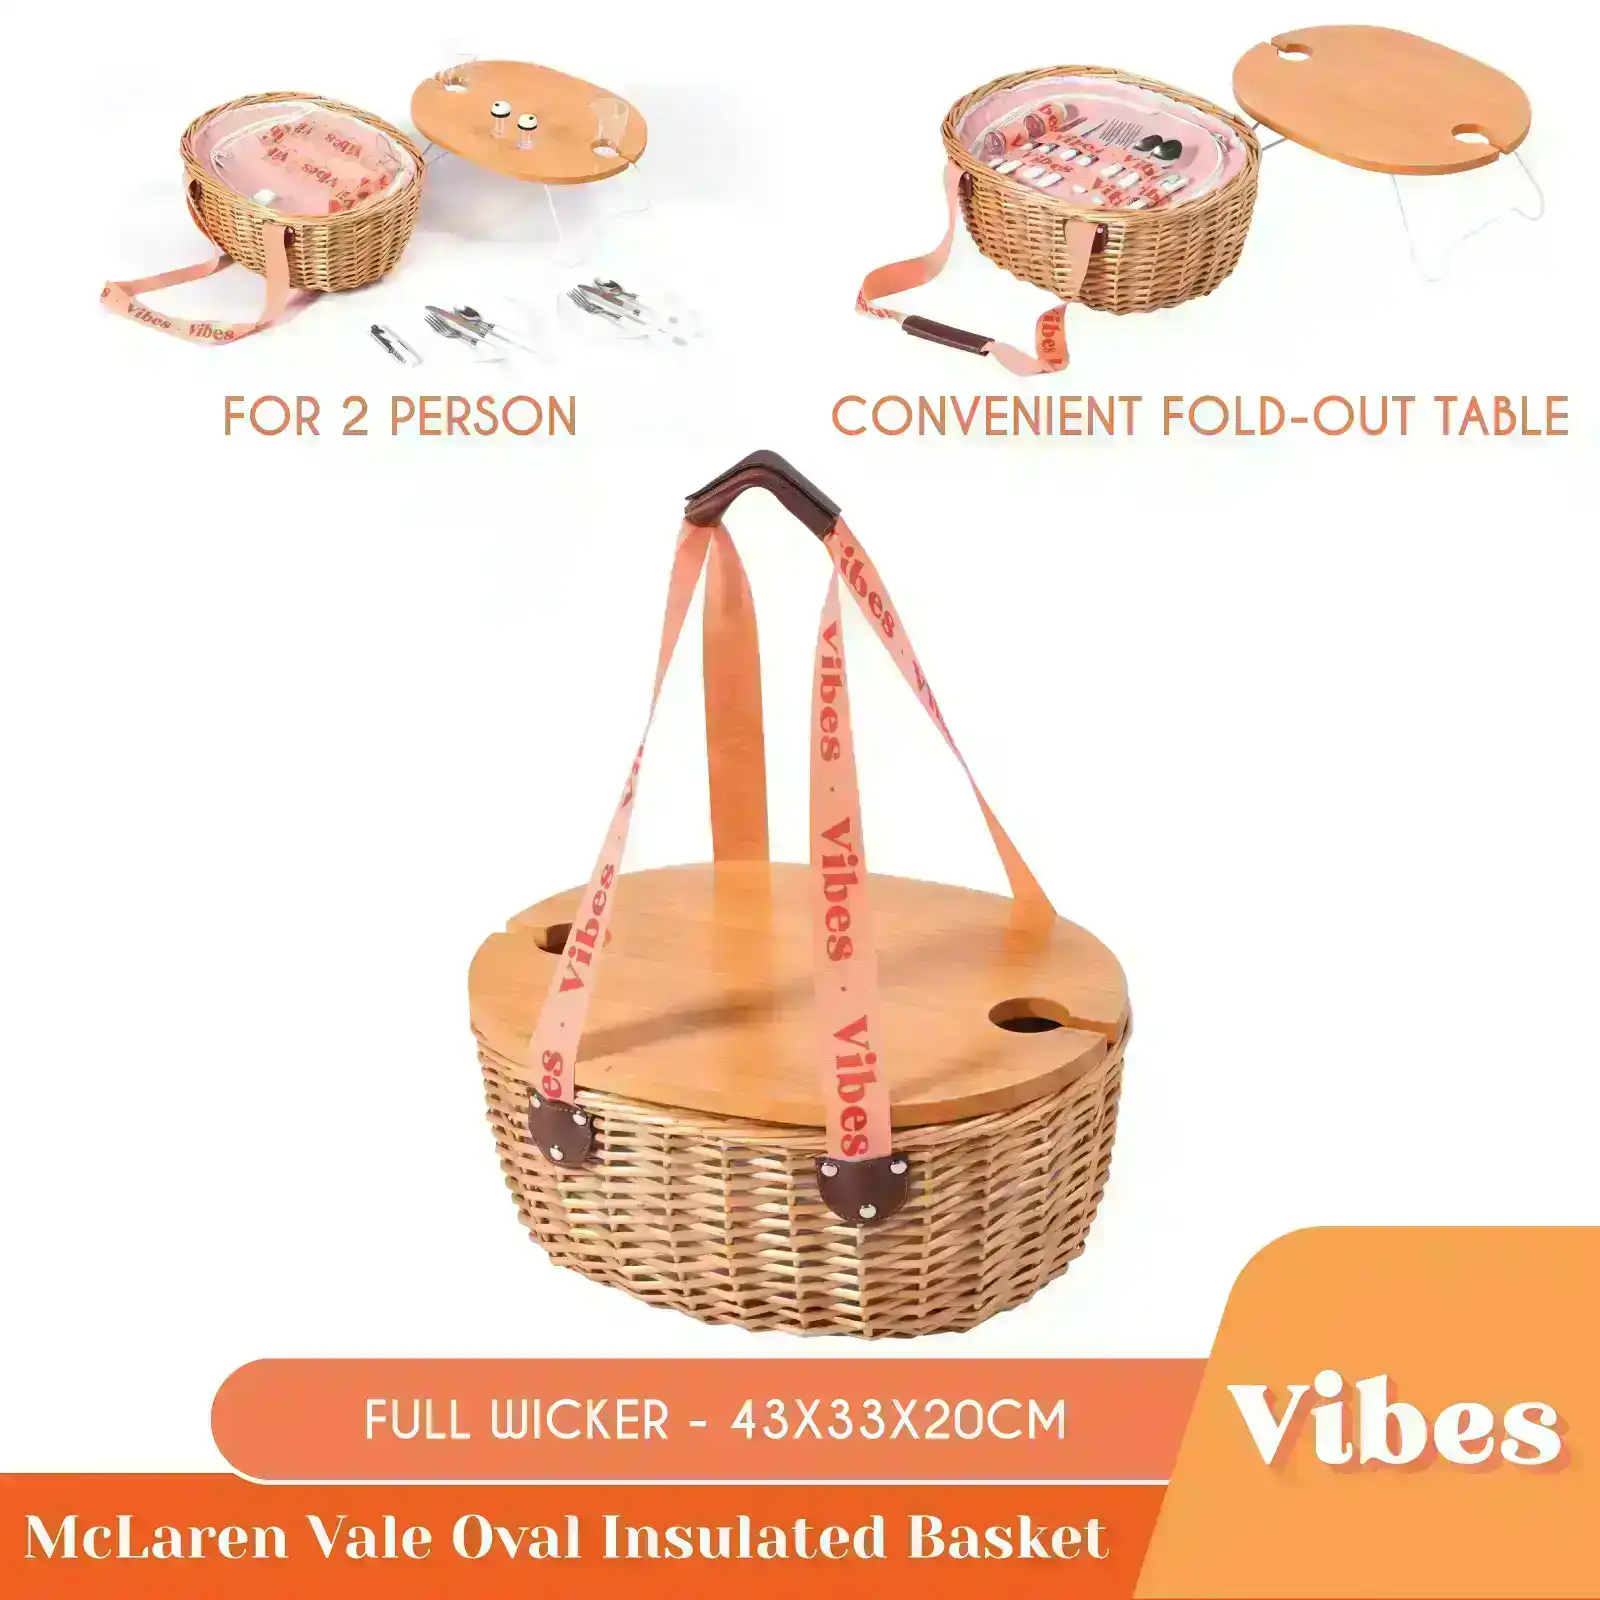 Vibes McLaren Vale 2 Person Oval Insulated Wicker Basket with Folding Table – Tan & Peach